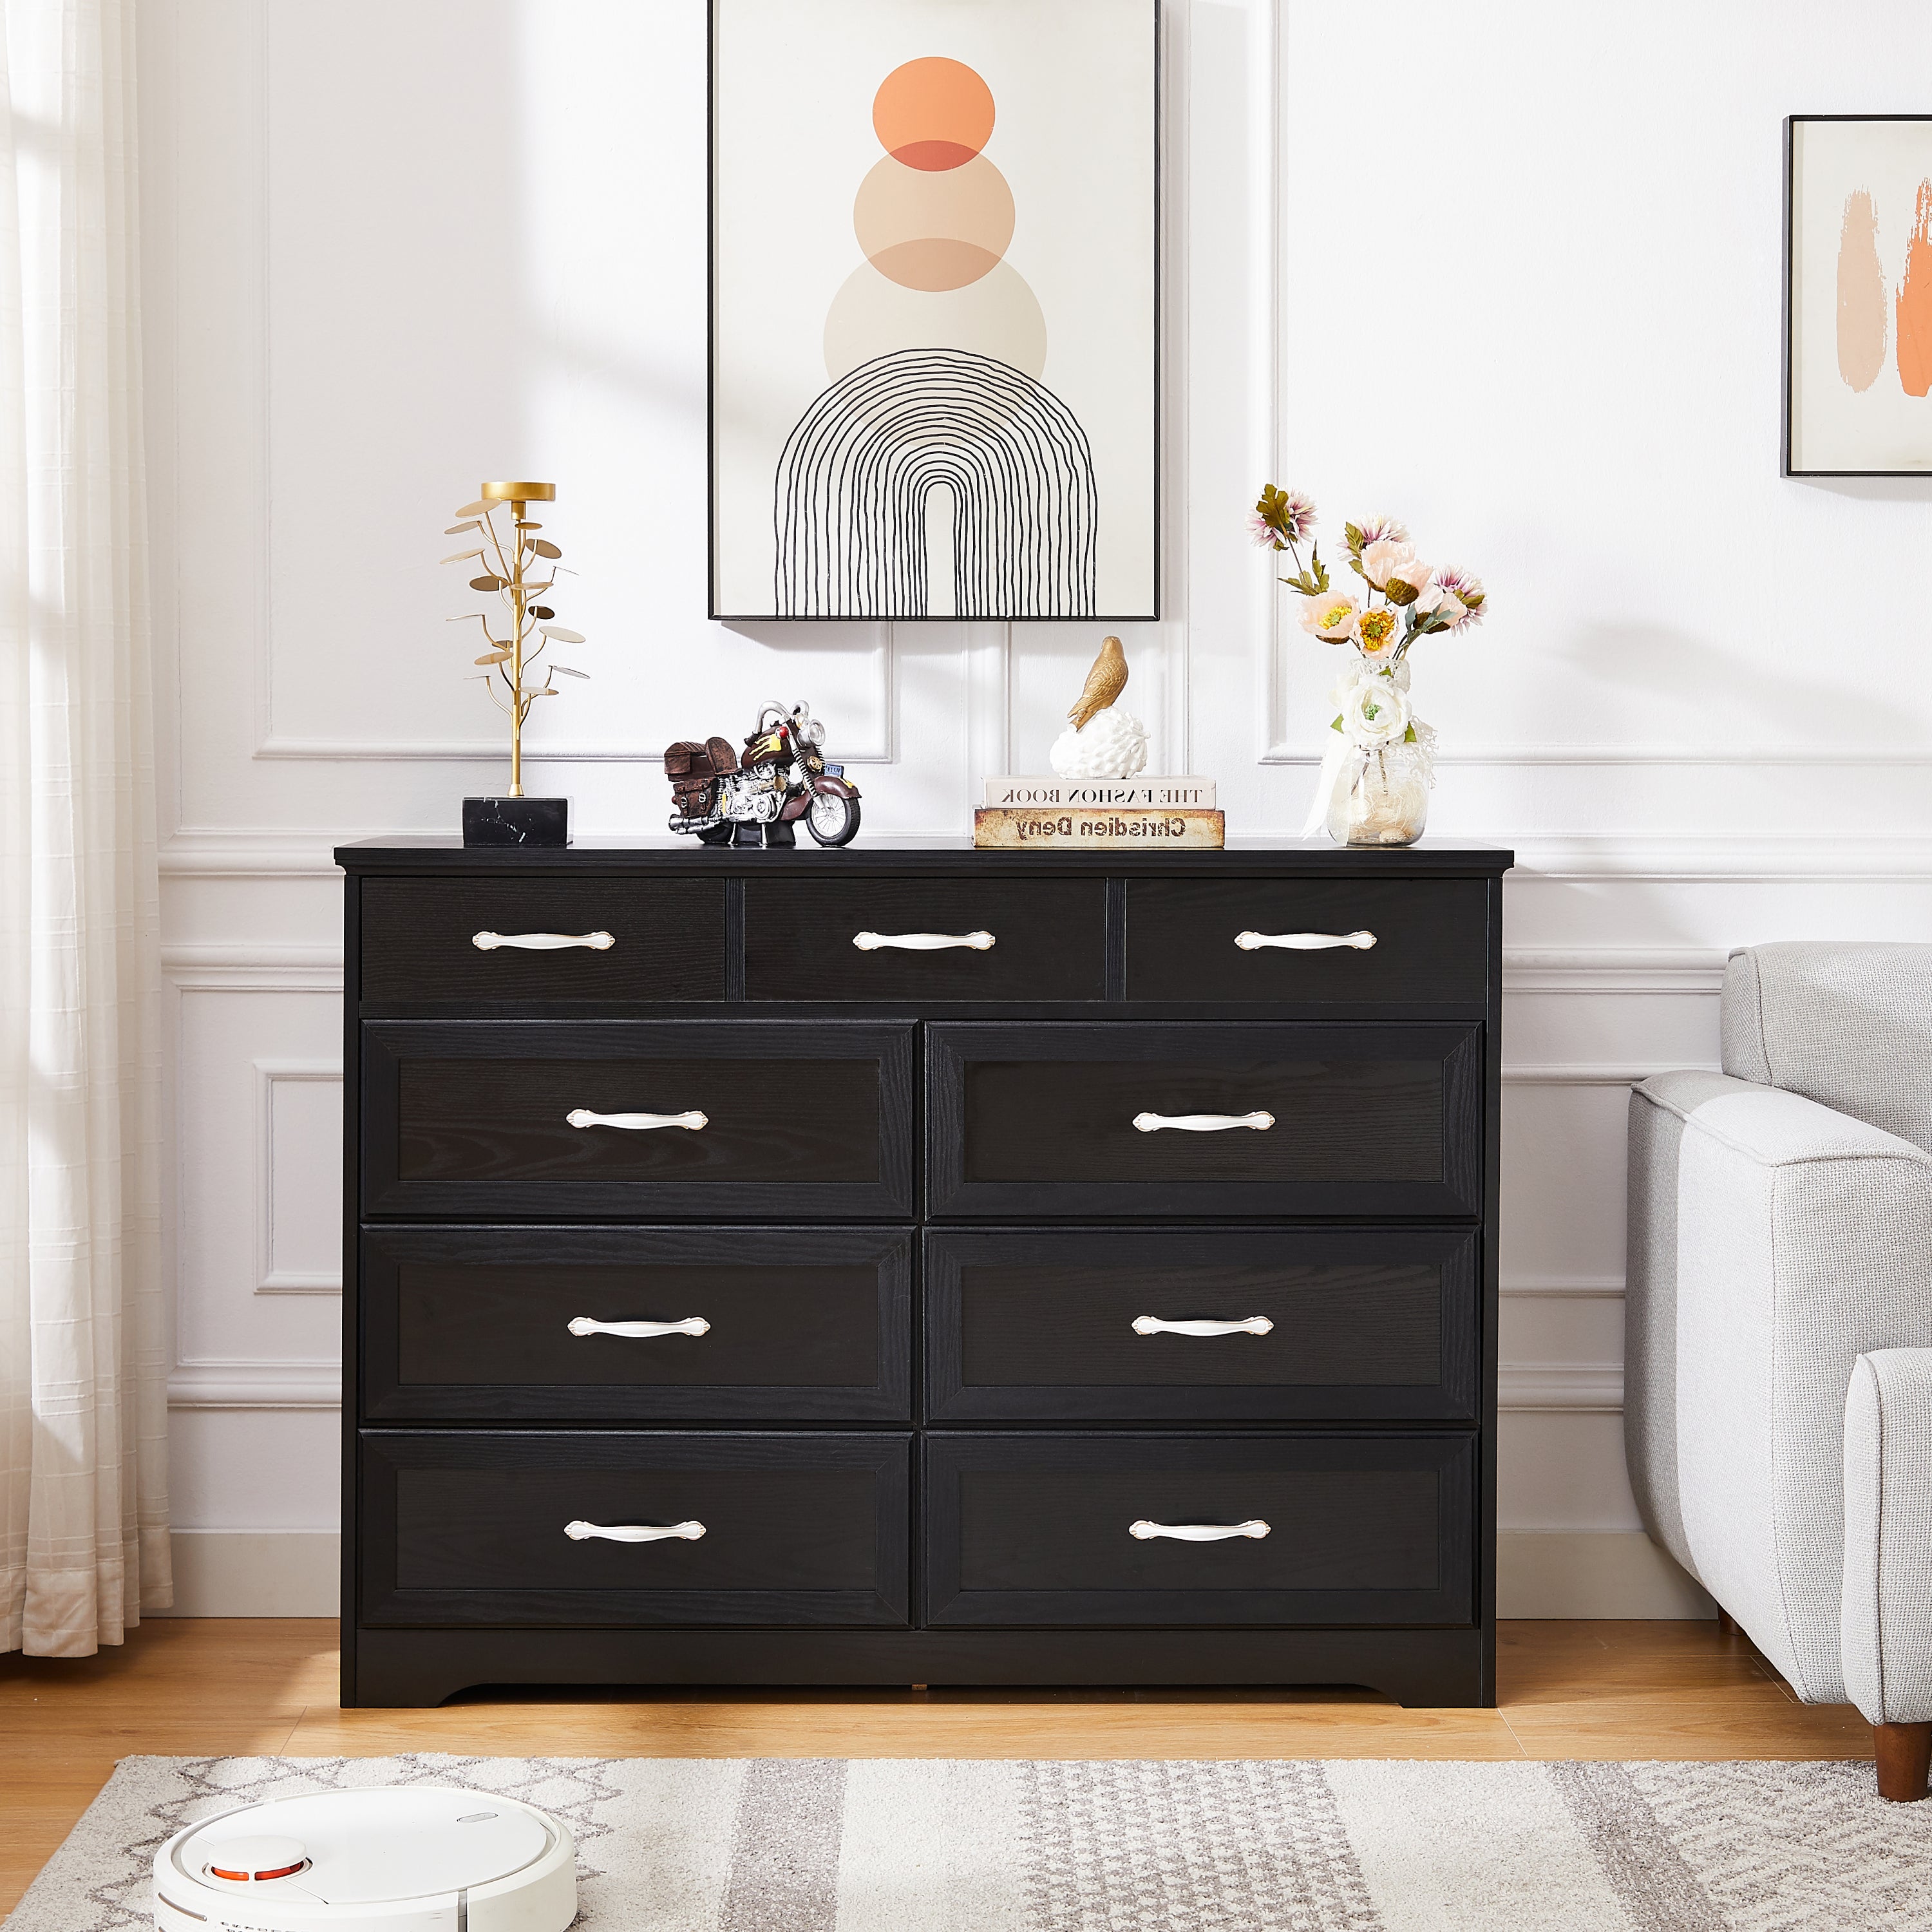 🆓🚛 Bedroom Dresser, 9 Drawer Long Dresser With Antique Handles, Wood Chest of Drawers for Kids Room, Living Room, Entry and Hallway, Black, 47.56''W X 15.75''D X 34.45''H.